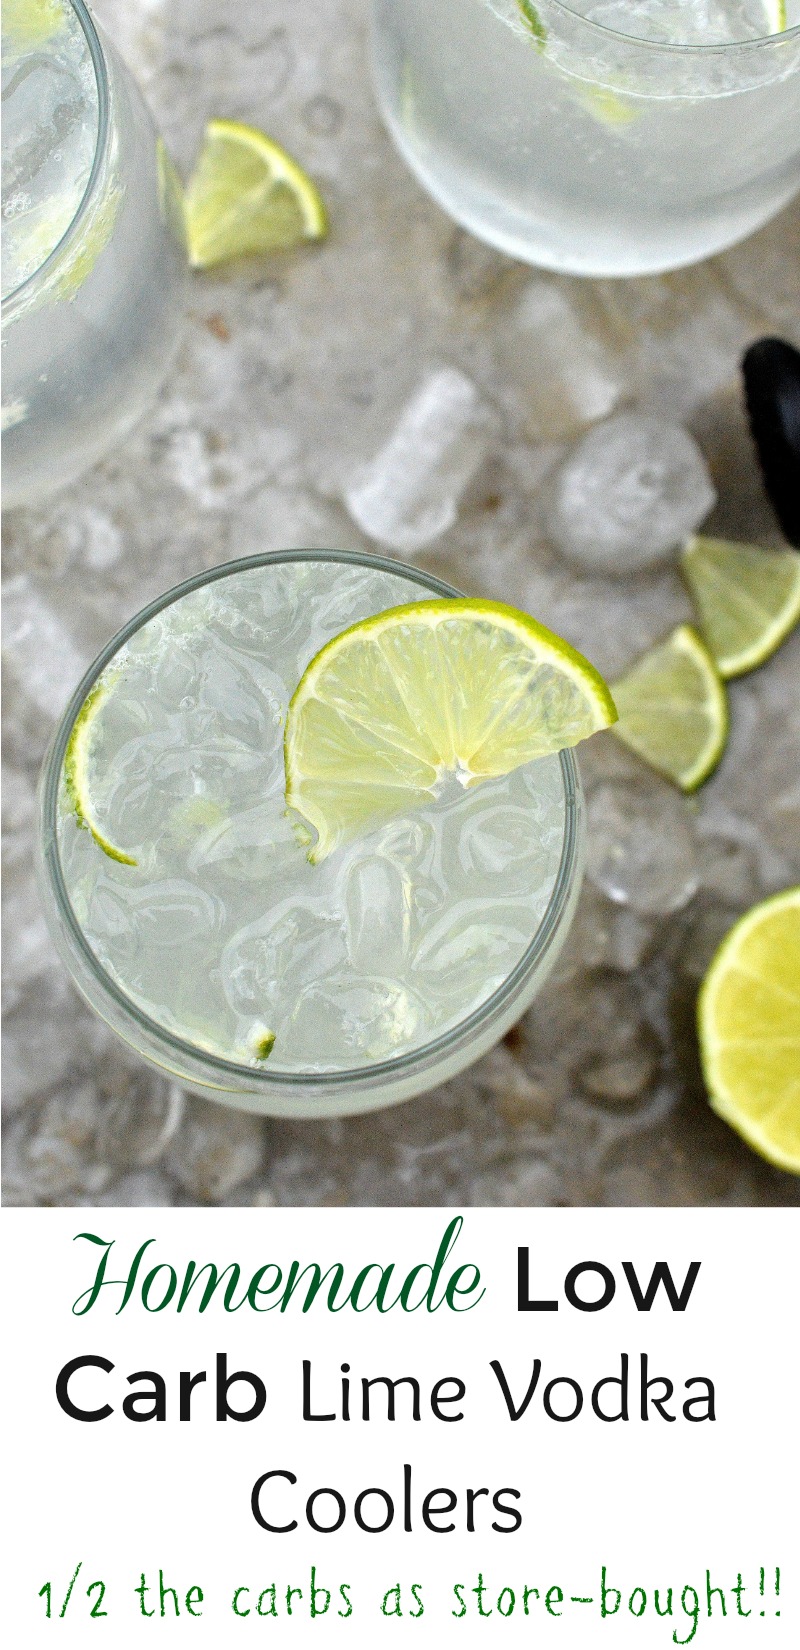 Homemade Low Carb Lime Vodka Coolers